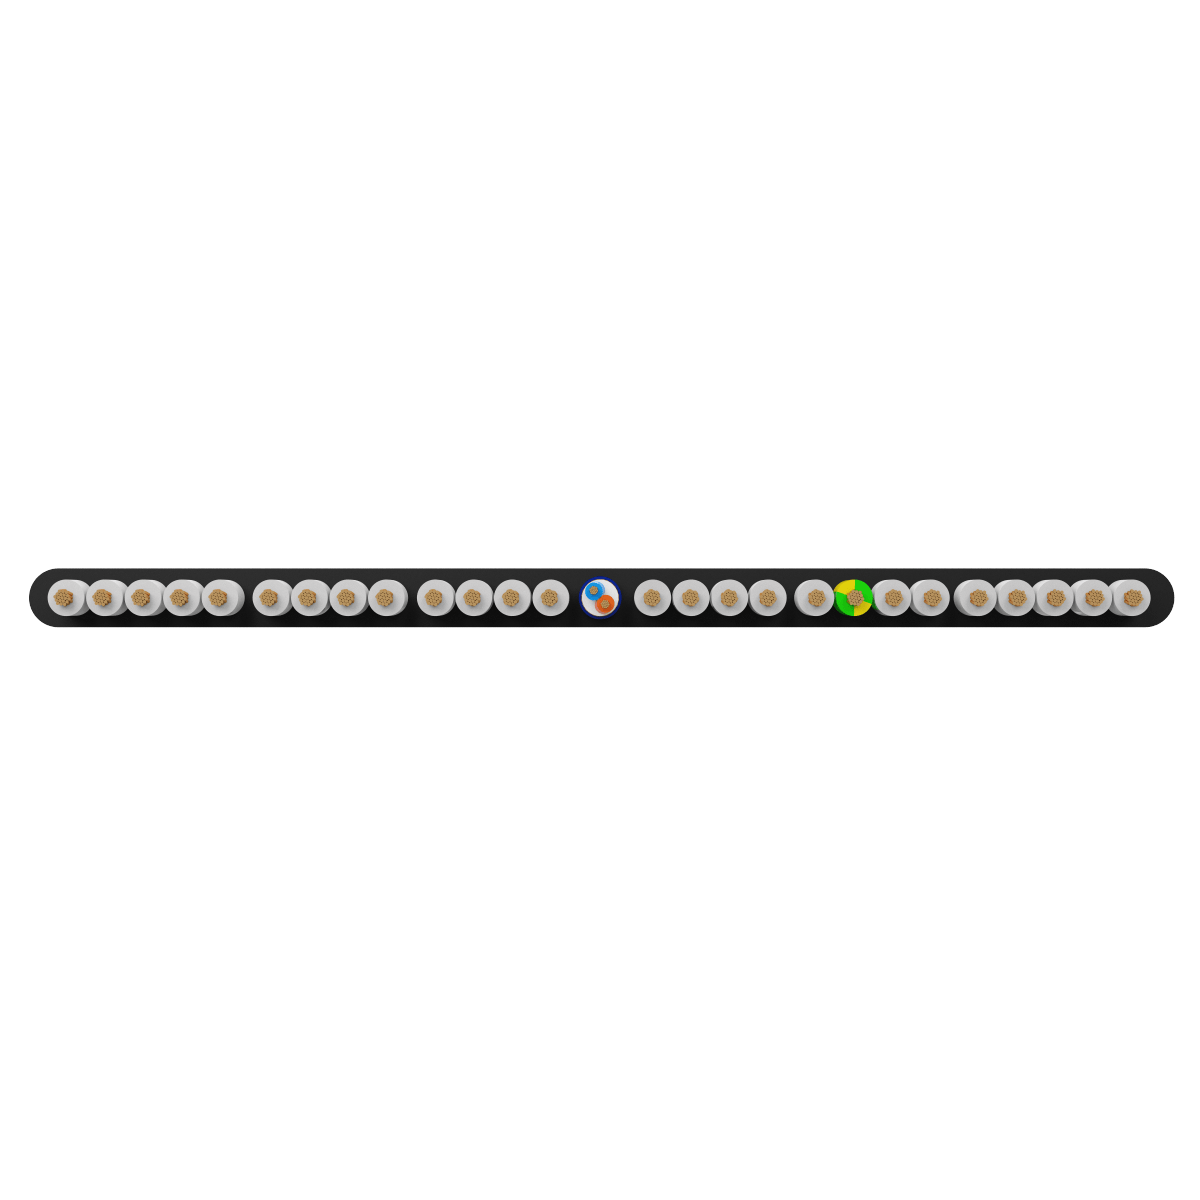 26x0.75 +1Px(2x0.22) mm² H05VVH6-F Foiled Elevator Cable